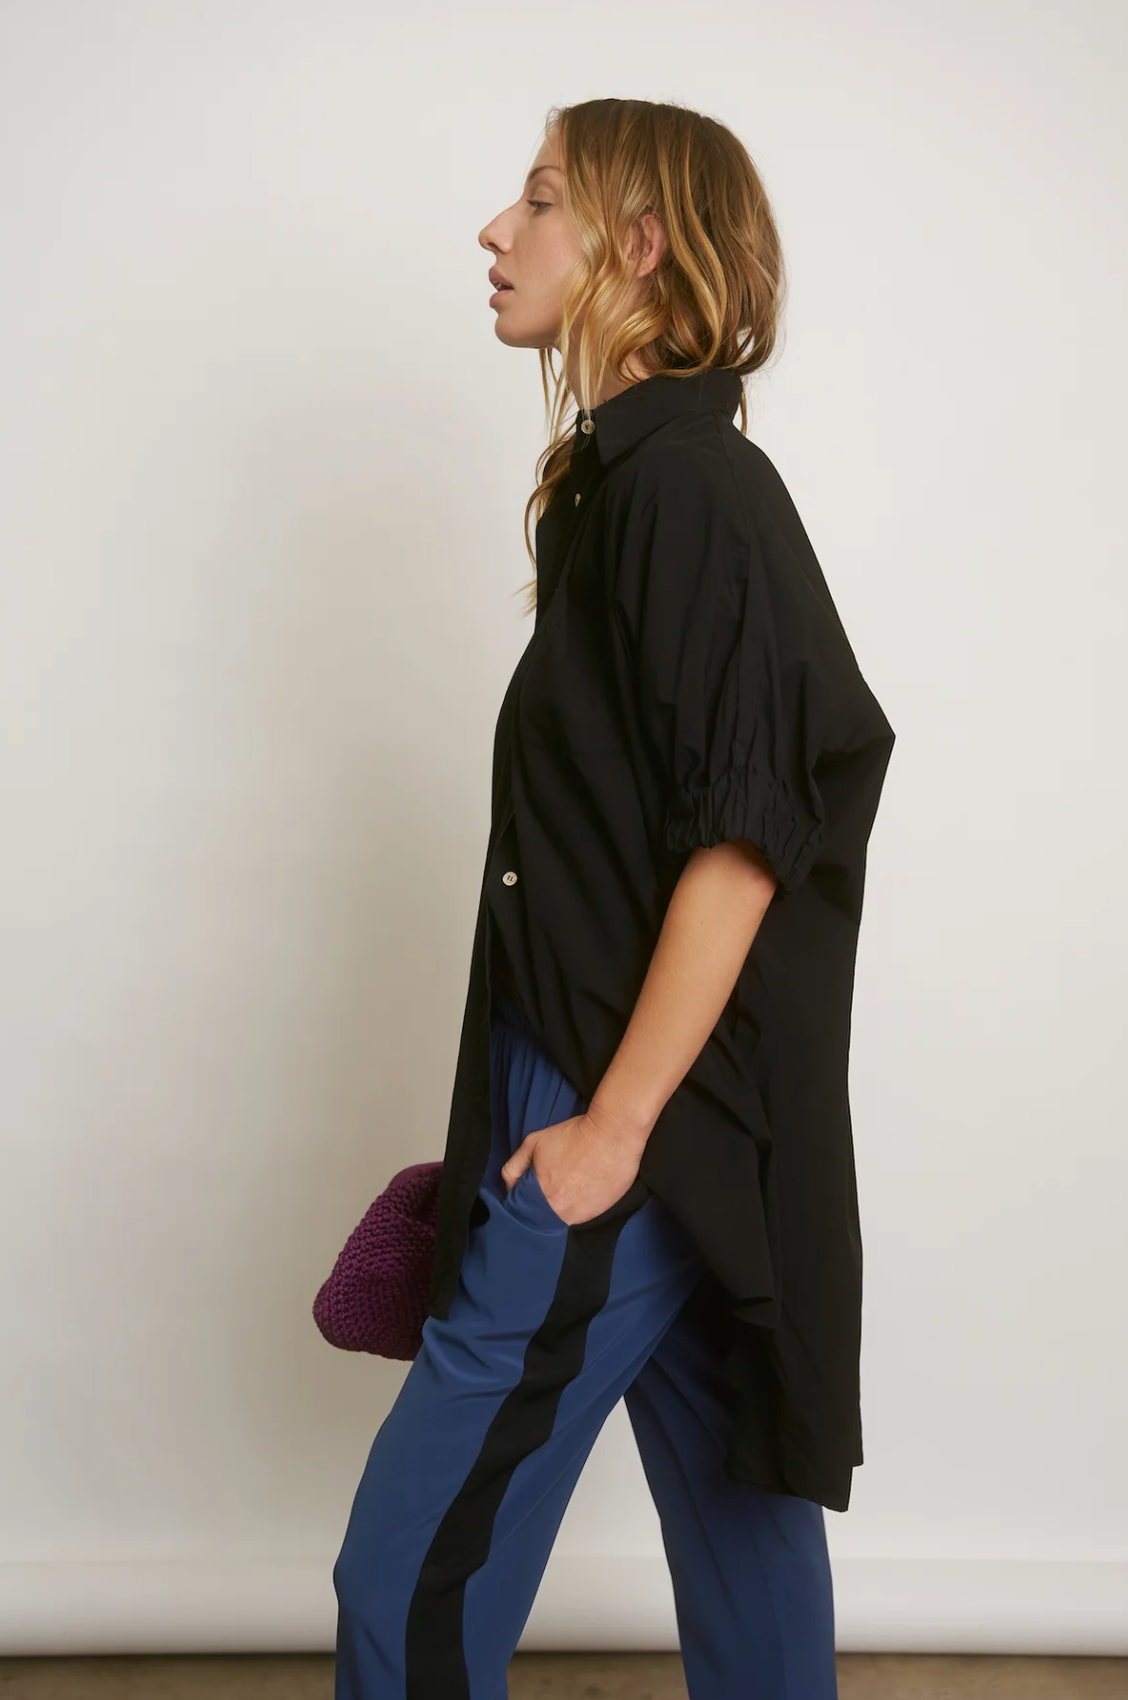 A woman in profile wears a black blouse and blue trousers, carrying a purple bag. She is standing against a plain light background, exuding Aquarius Cocktail style.